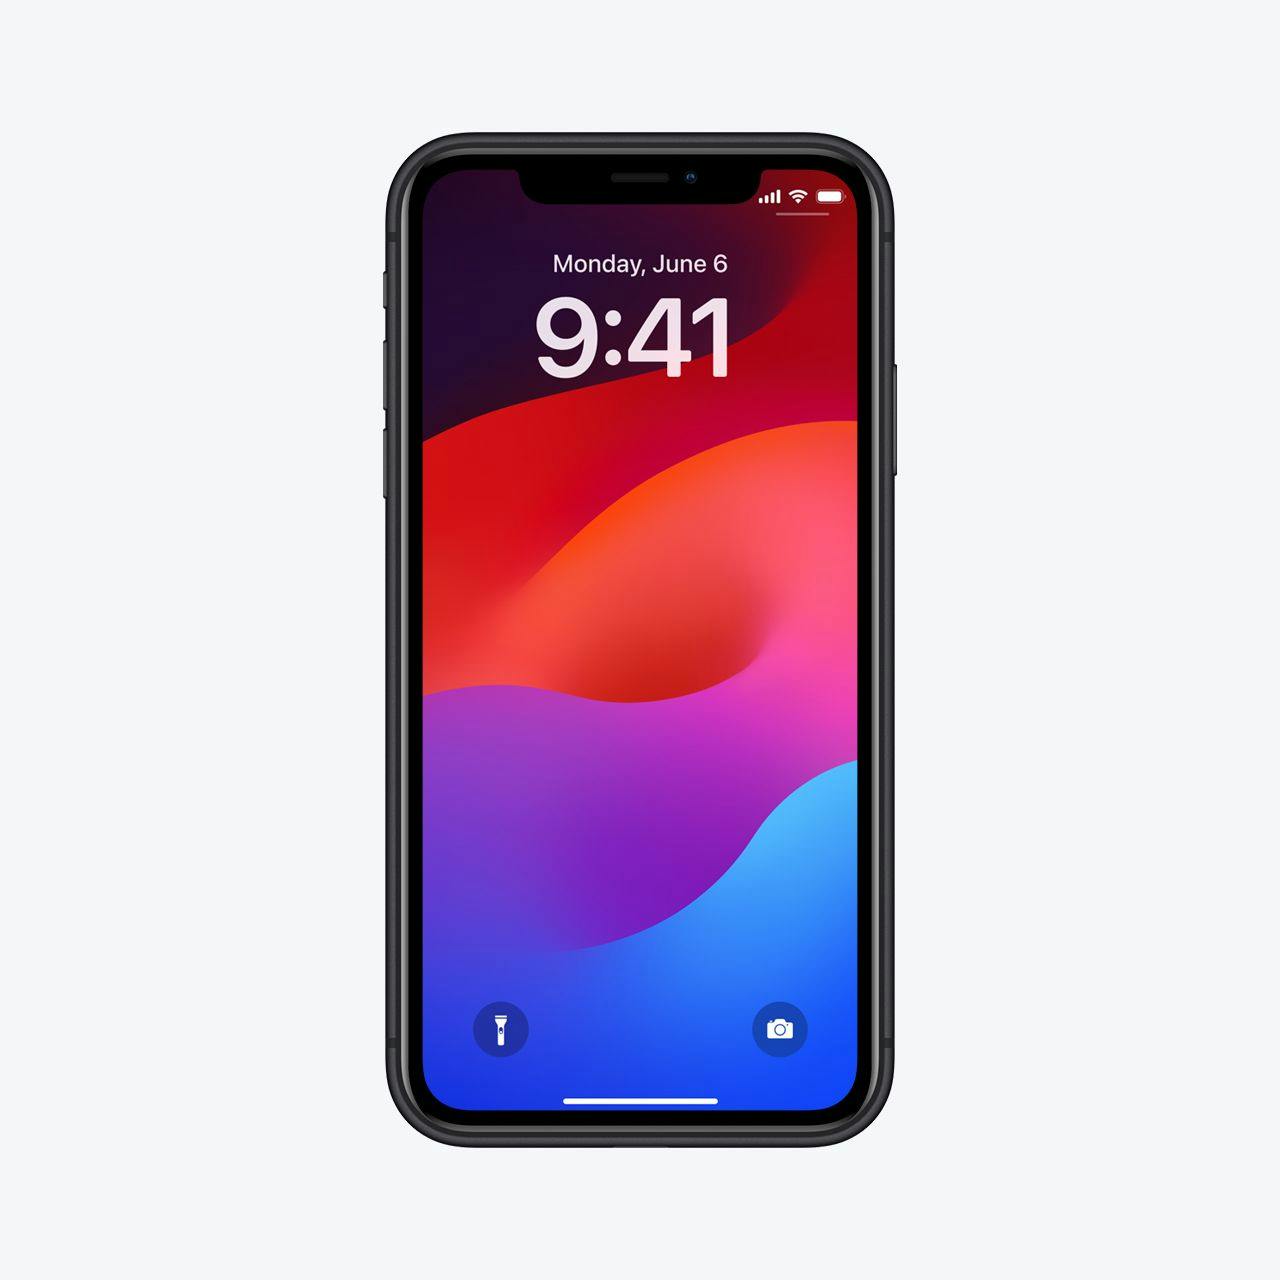 Image of iPhone 11.